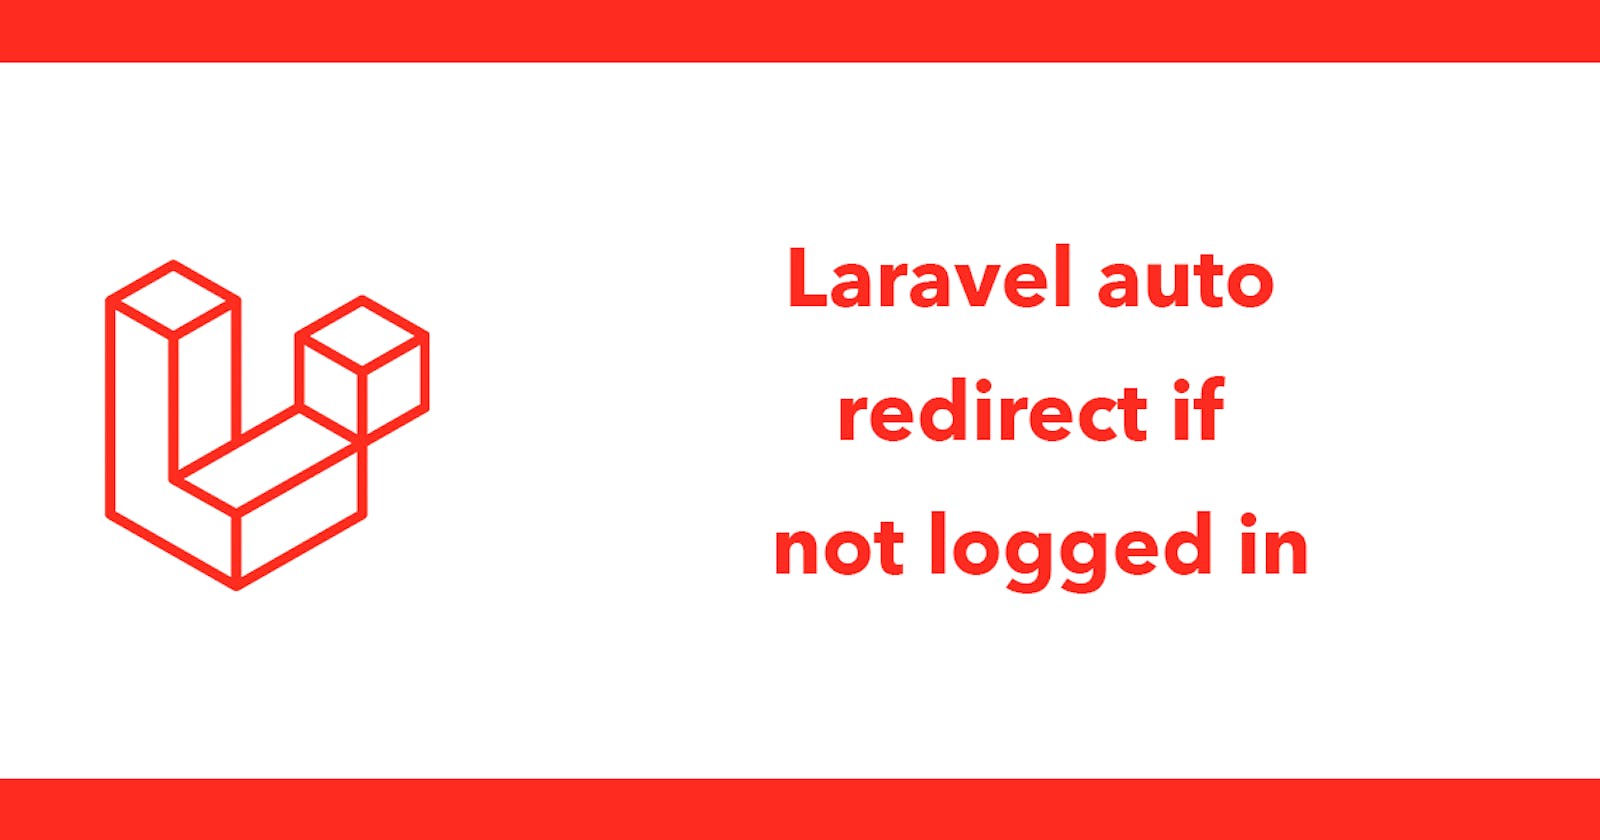 Laravel Auto redirect if not logged in